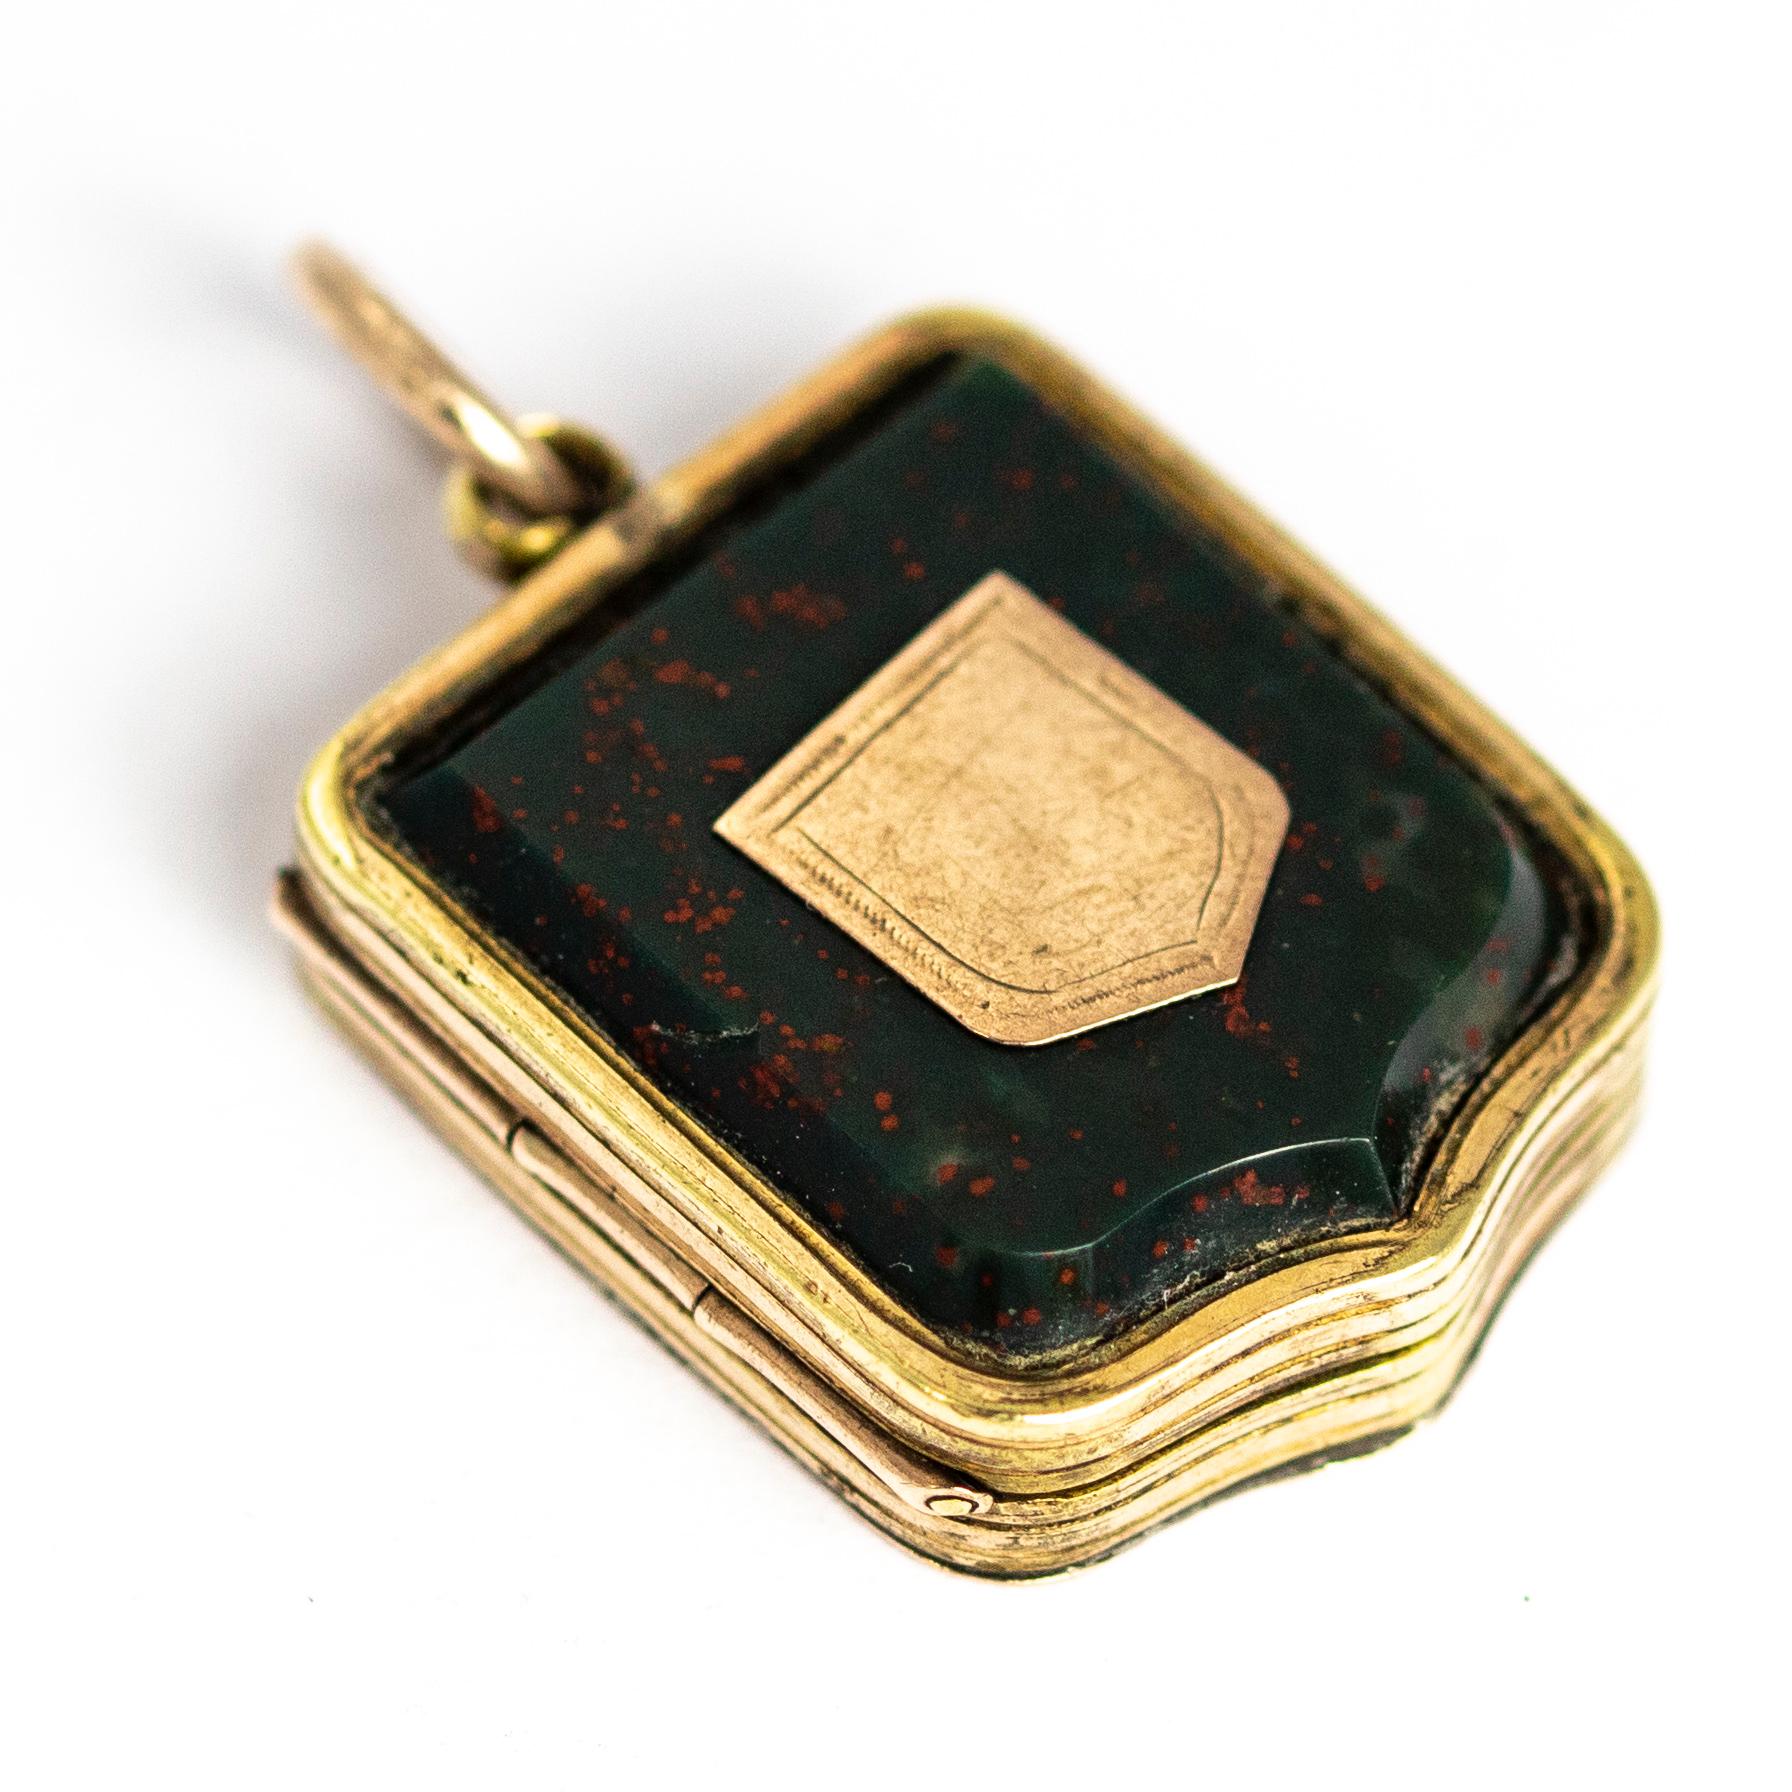 This unusual and wonderful locket has a glossy shield shaped bloodstone on the front of it with a gold shield placed in the centre. The back of the locket has intricate scroll and shield engraving. On the inside of the locket there is a picture of a